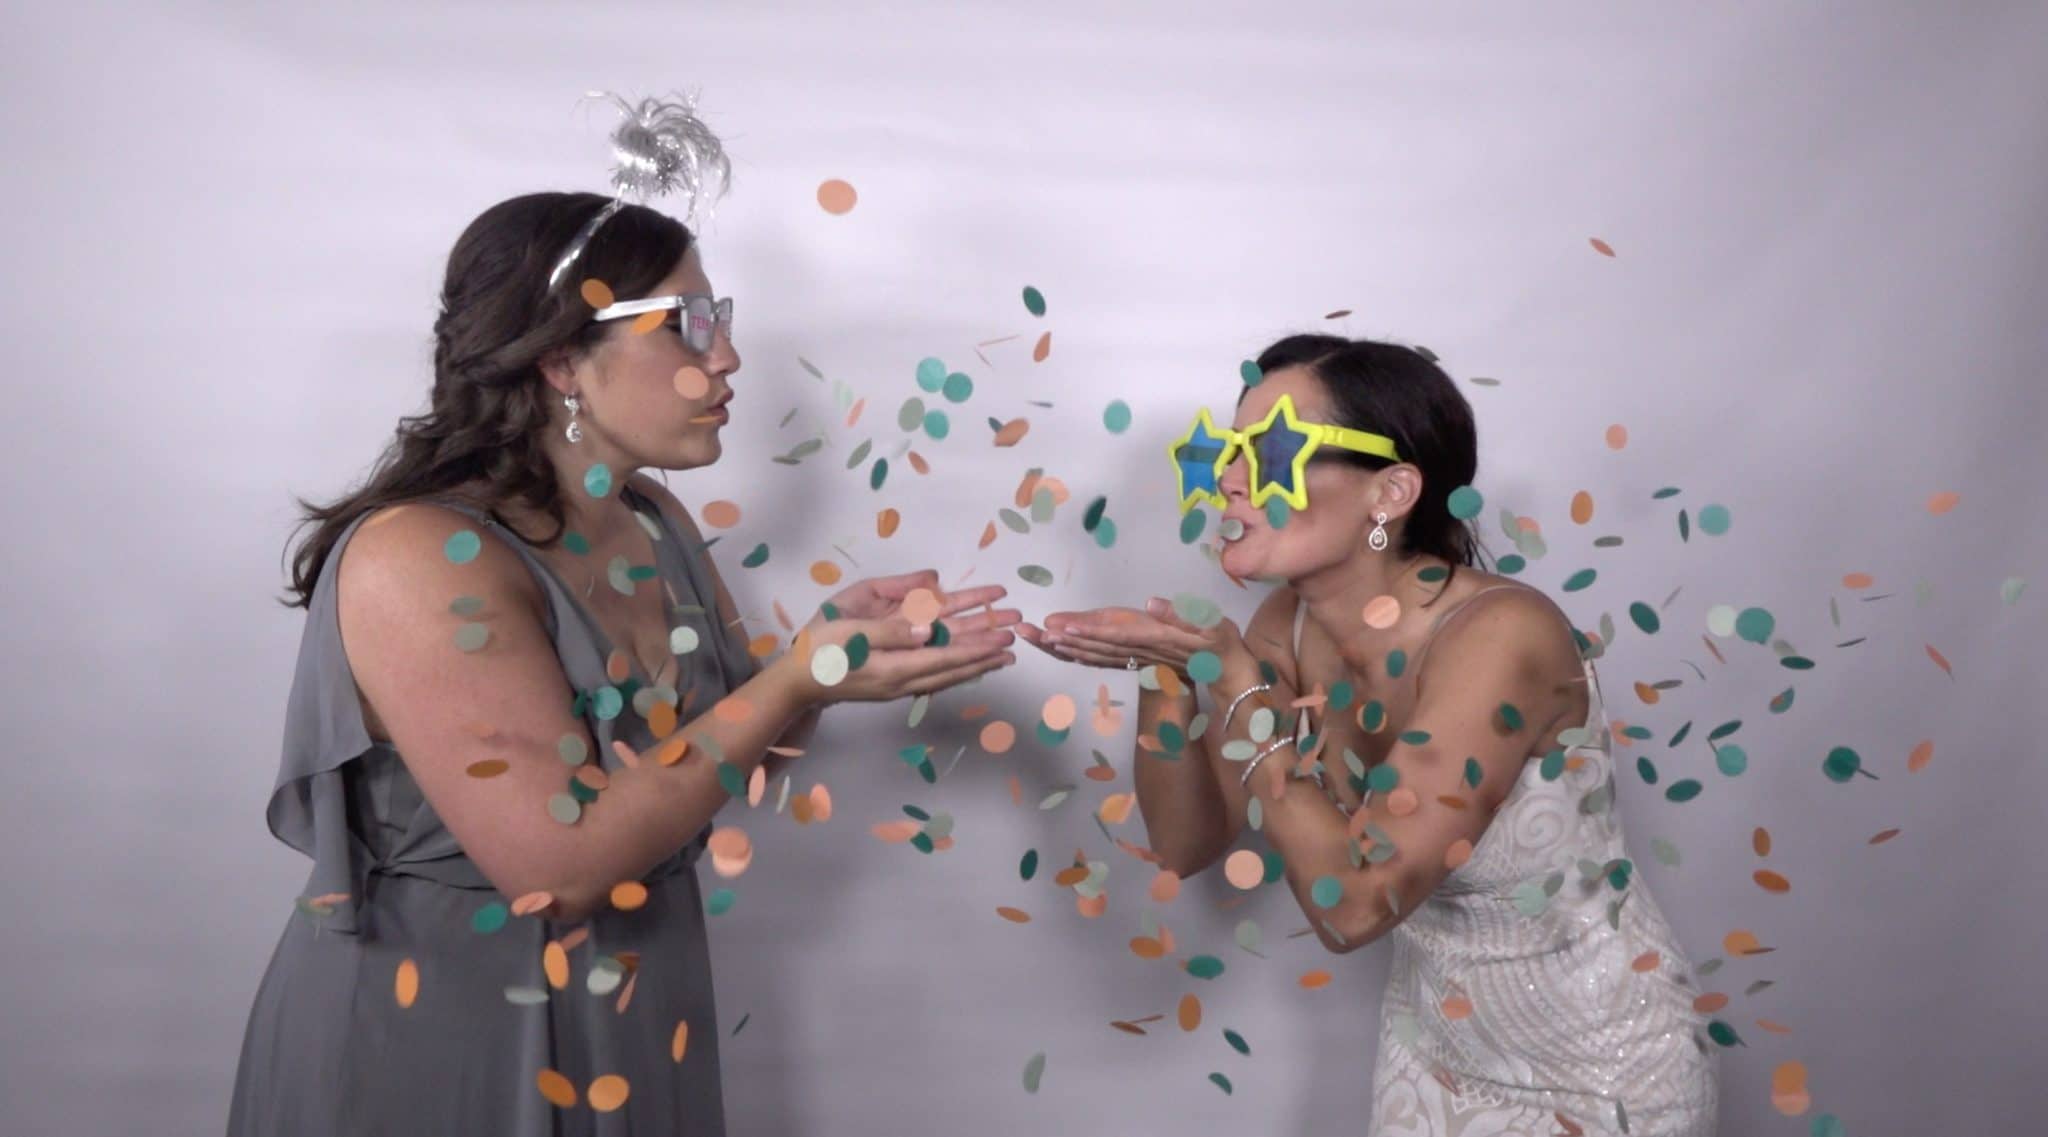 Omarvelous Productions - bride and guest blowing kisses with confetti